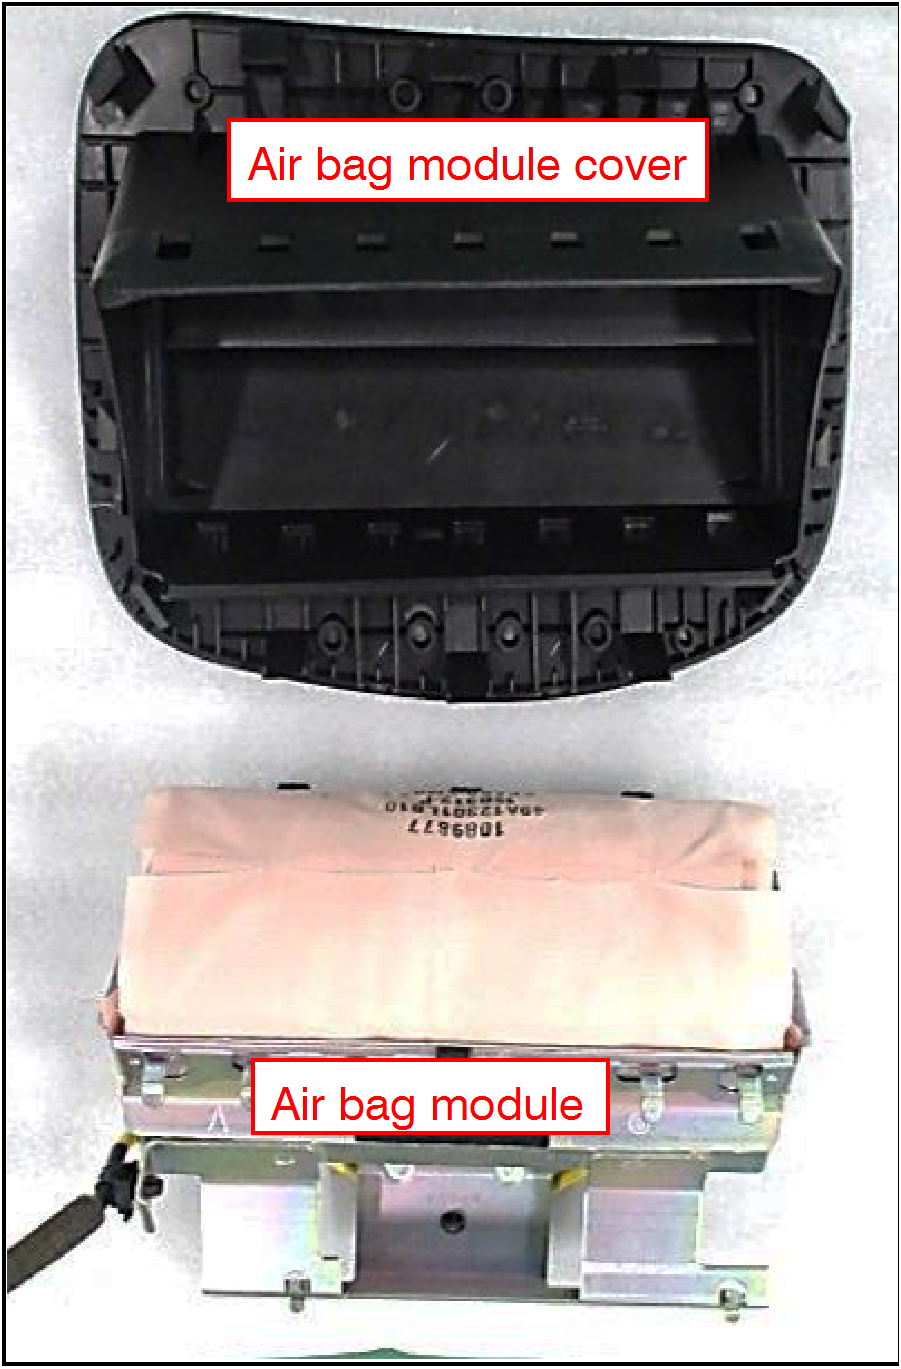 Continue rotating the air bag module until it fully separates from the cover